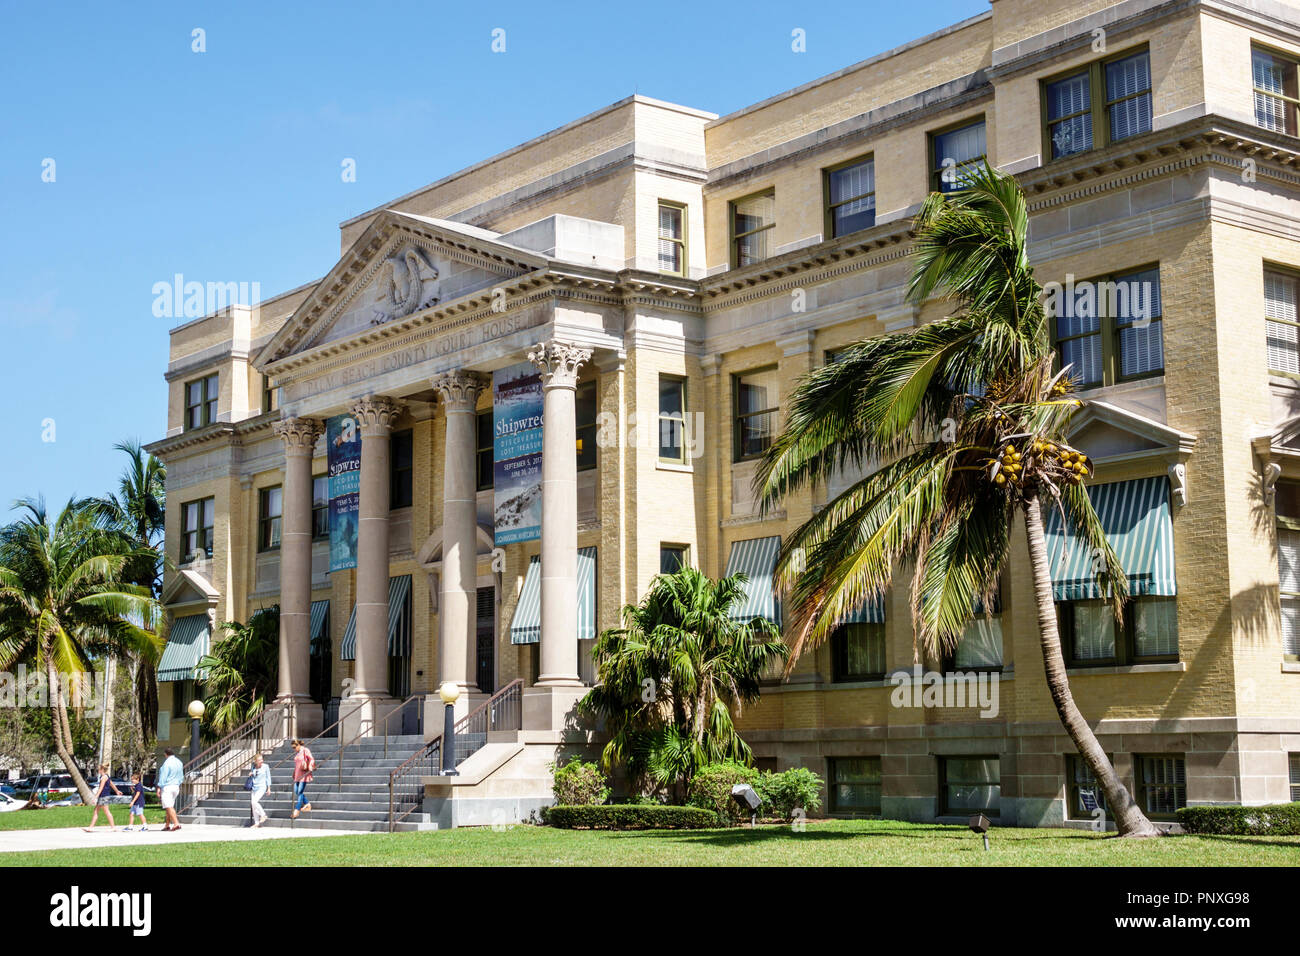 West Palm Beach Florida, Palm Beach County History Museum, 1916 County Court House, historisch, Vordereingang, FL180212108 Stockfoto